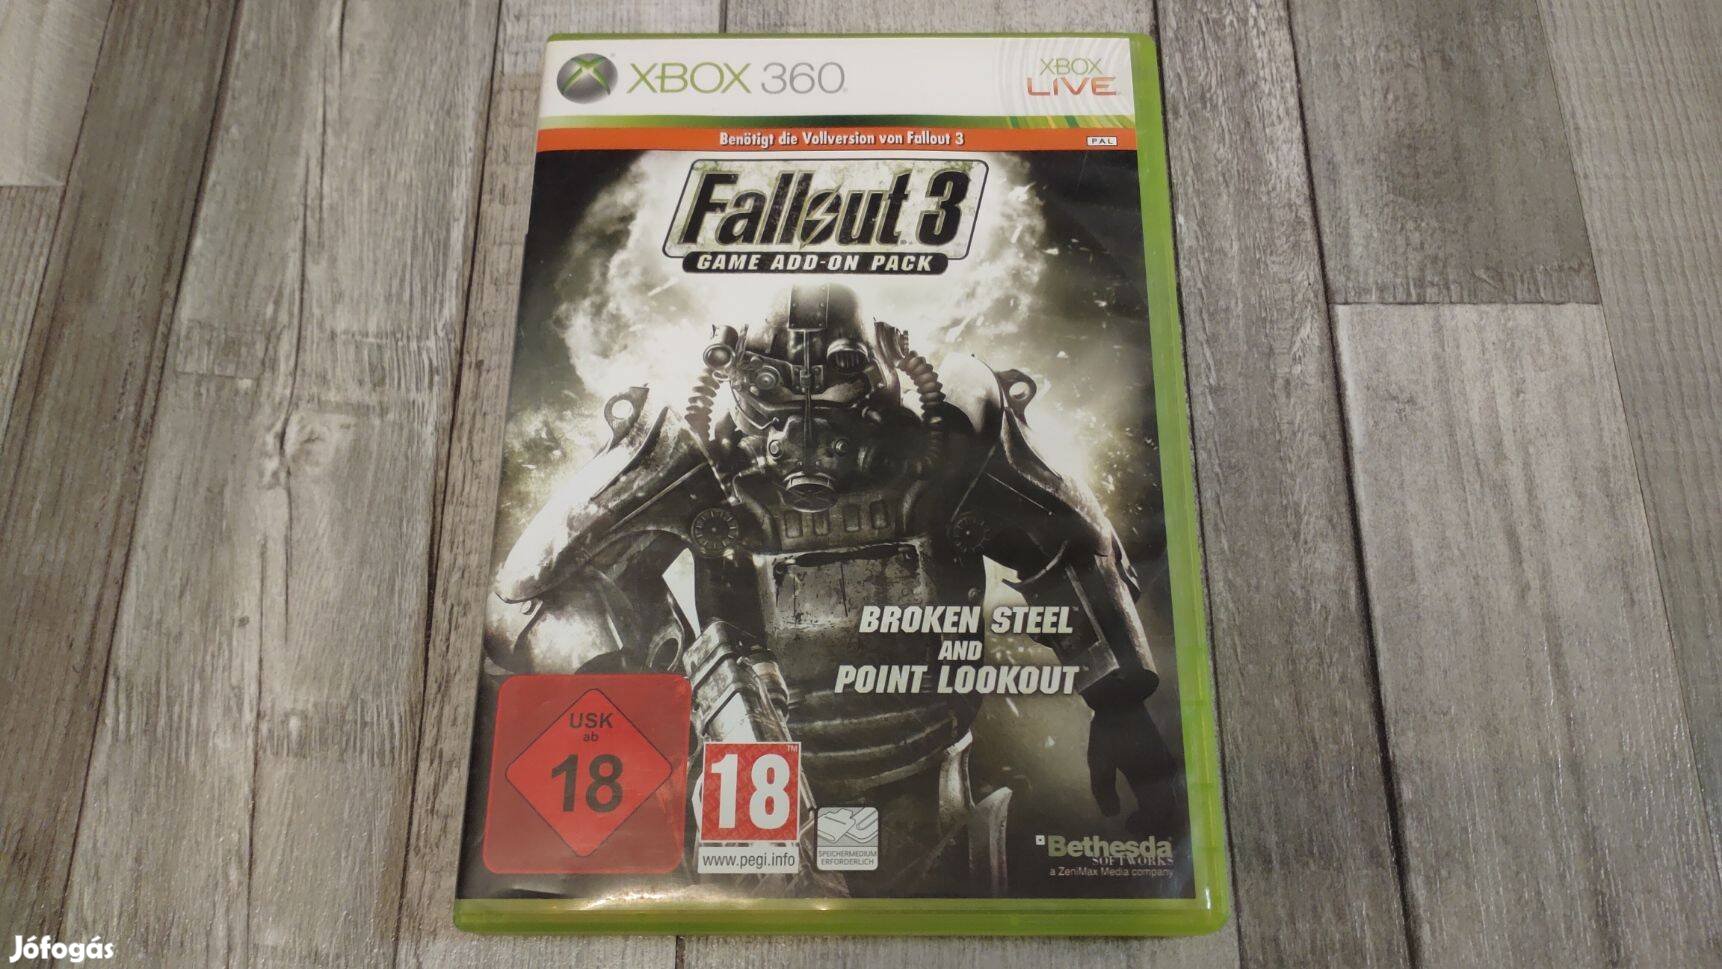 Top Xbox 360 : Fallout 3 Game Add-On Pack - DLC Lemez ! - Német